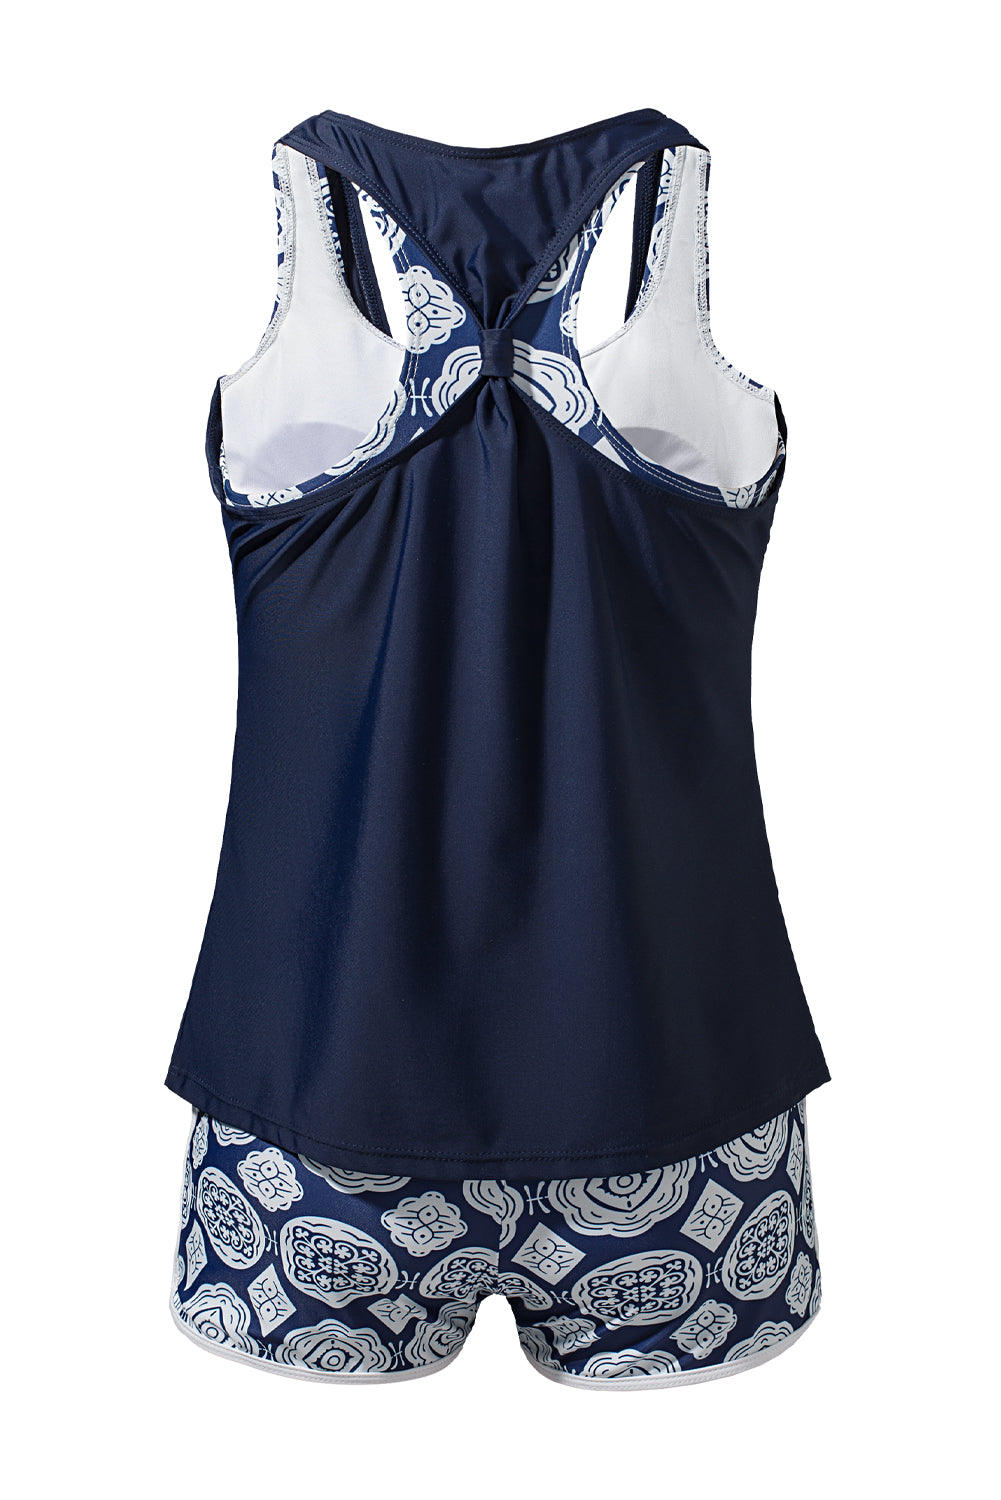 LC415772-5-S, LC415772-5-M, LC415772-5-L, LC415772-5-XL, LC415772-5-2XL, Blue 3 Piece Swimsuits for Women Printed Sporty Racerback Tankini Swimsuit